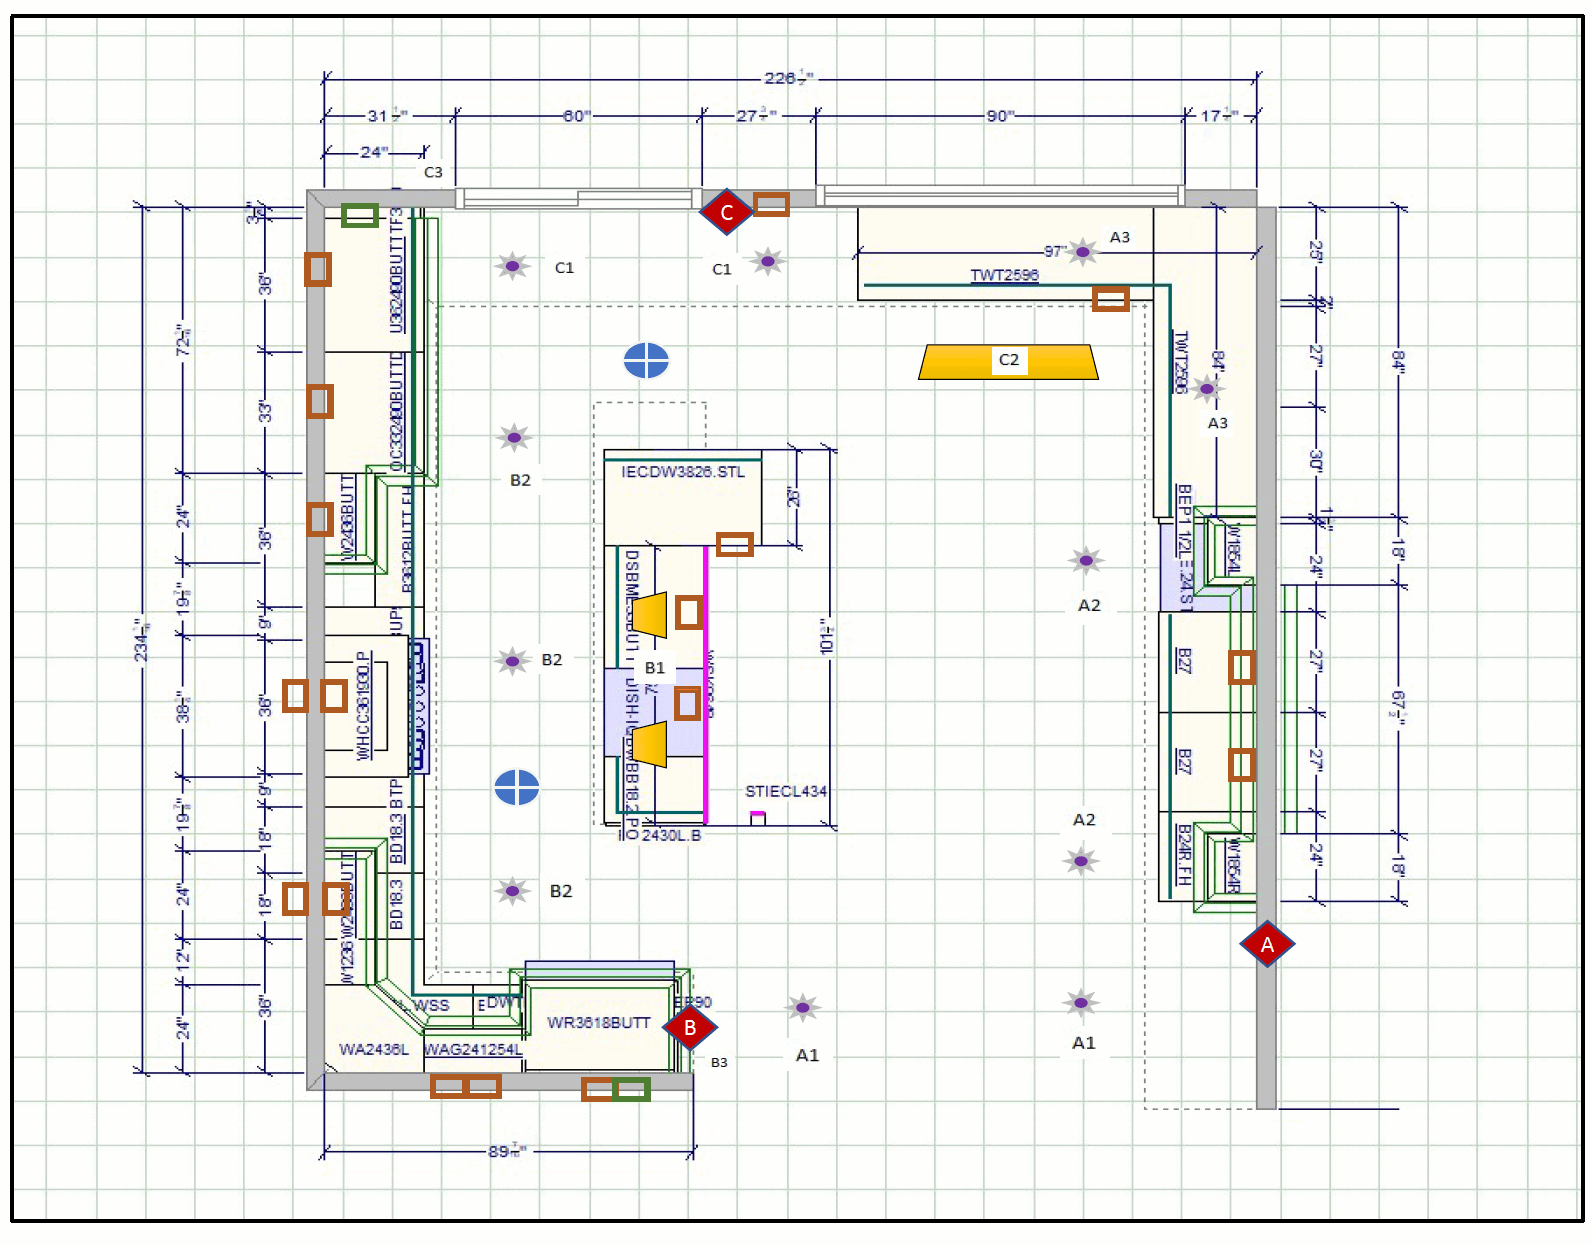 Creating our kitchen electrical plan